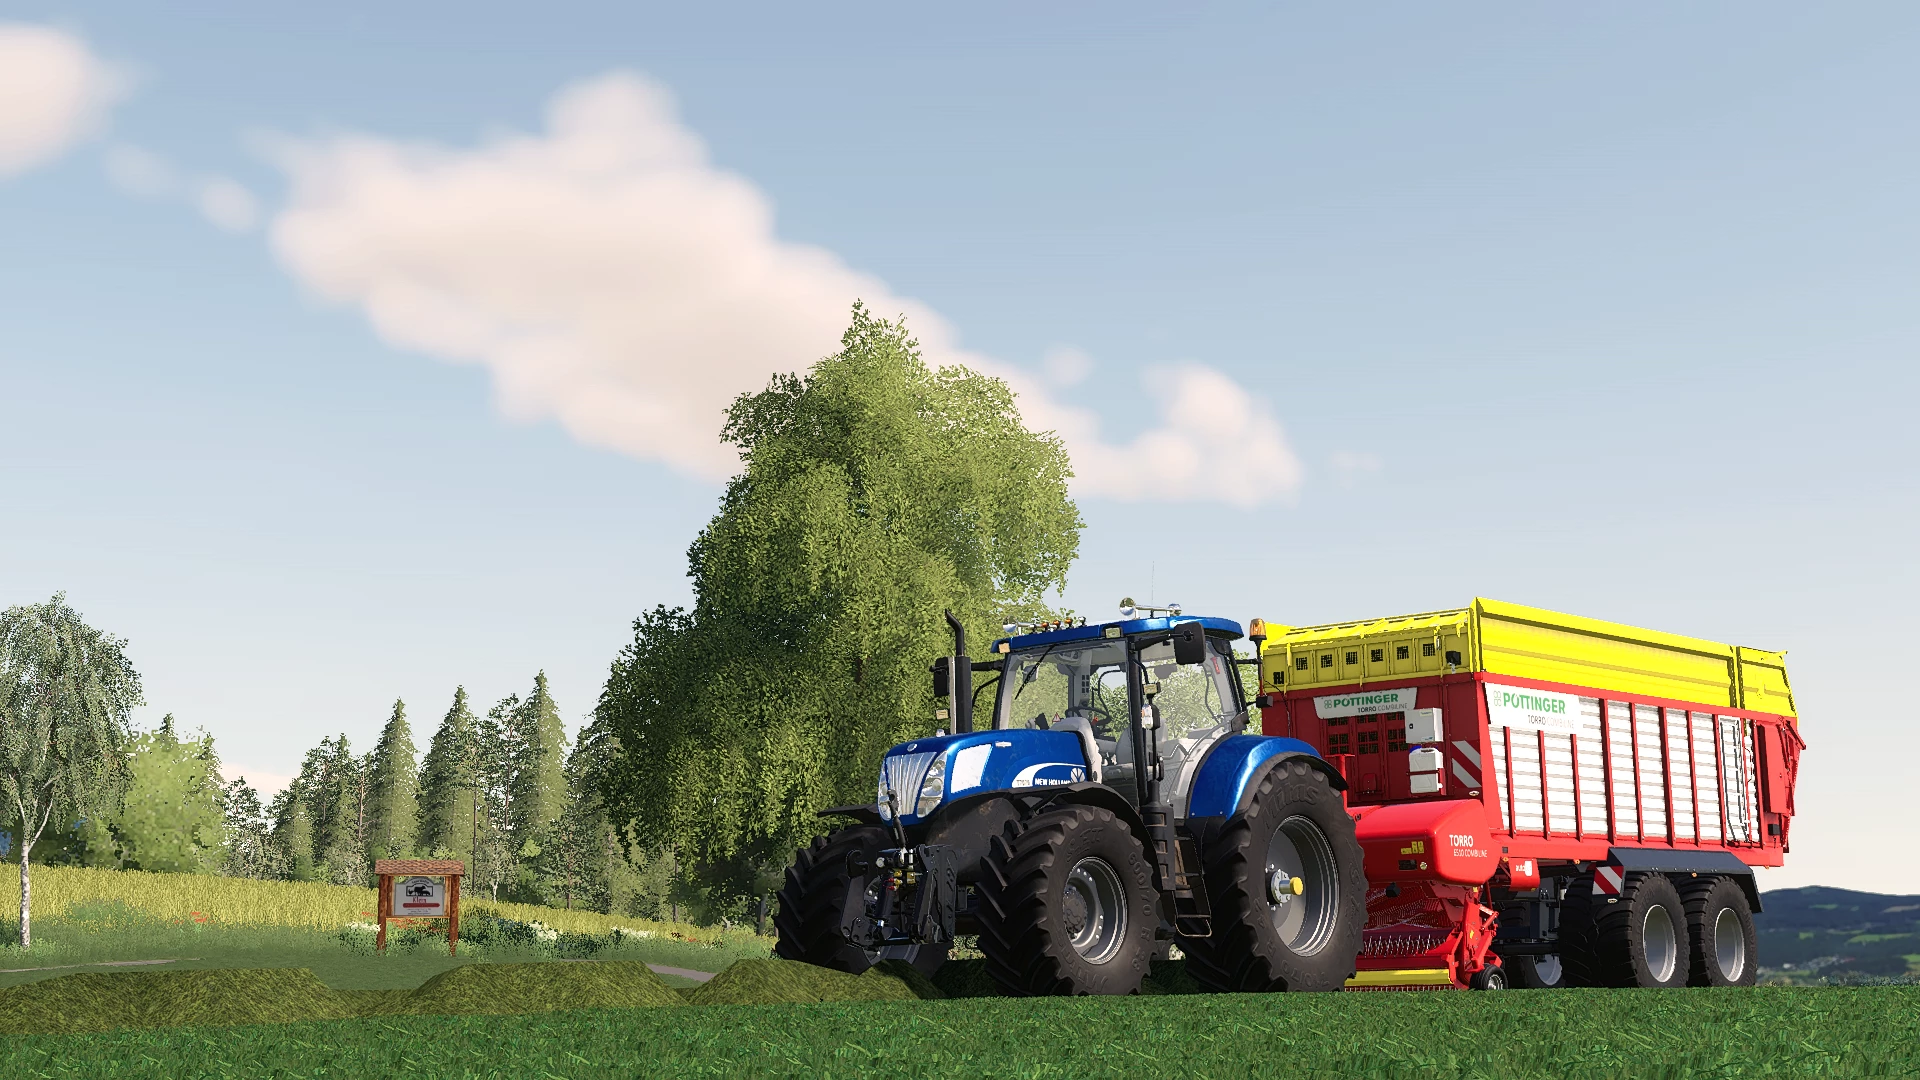 loading some grass